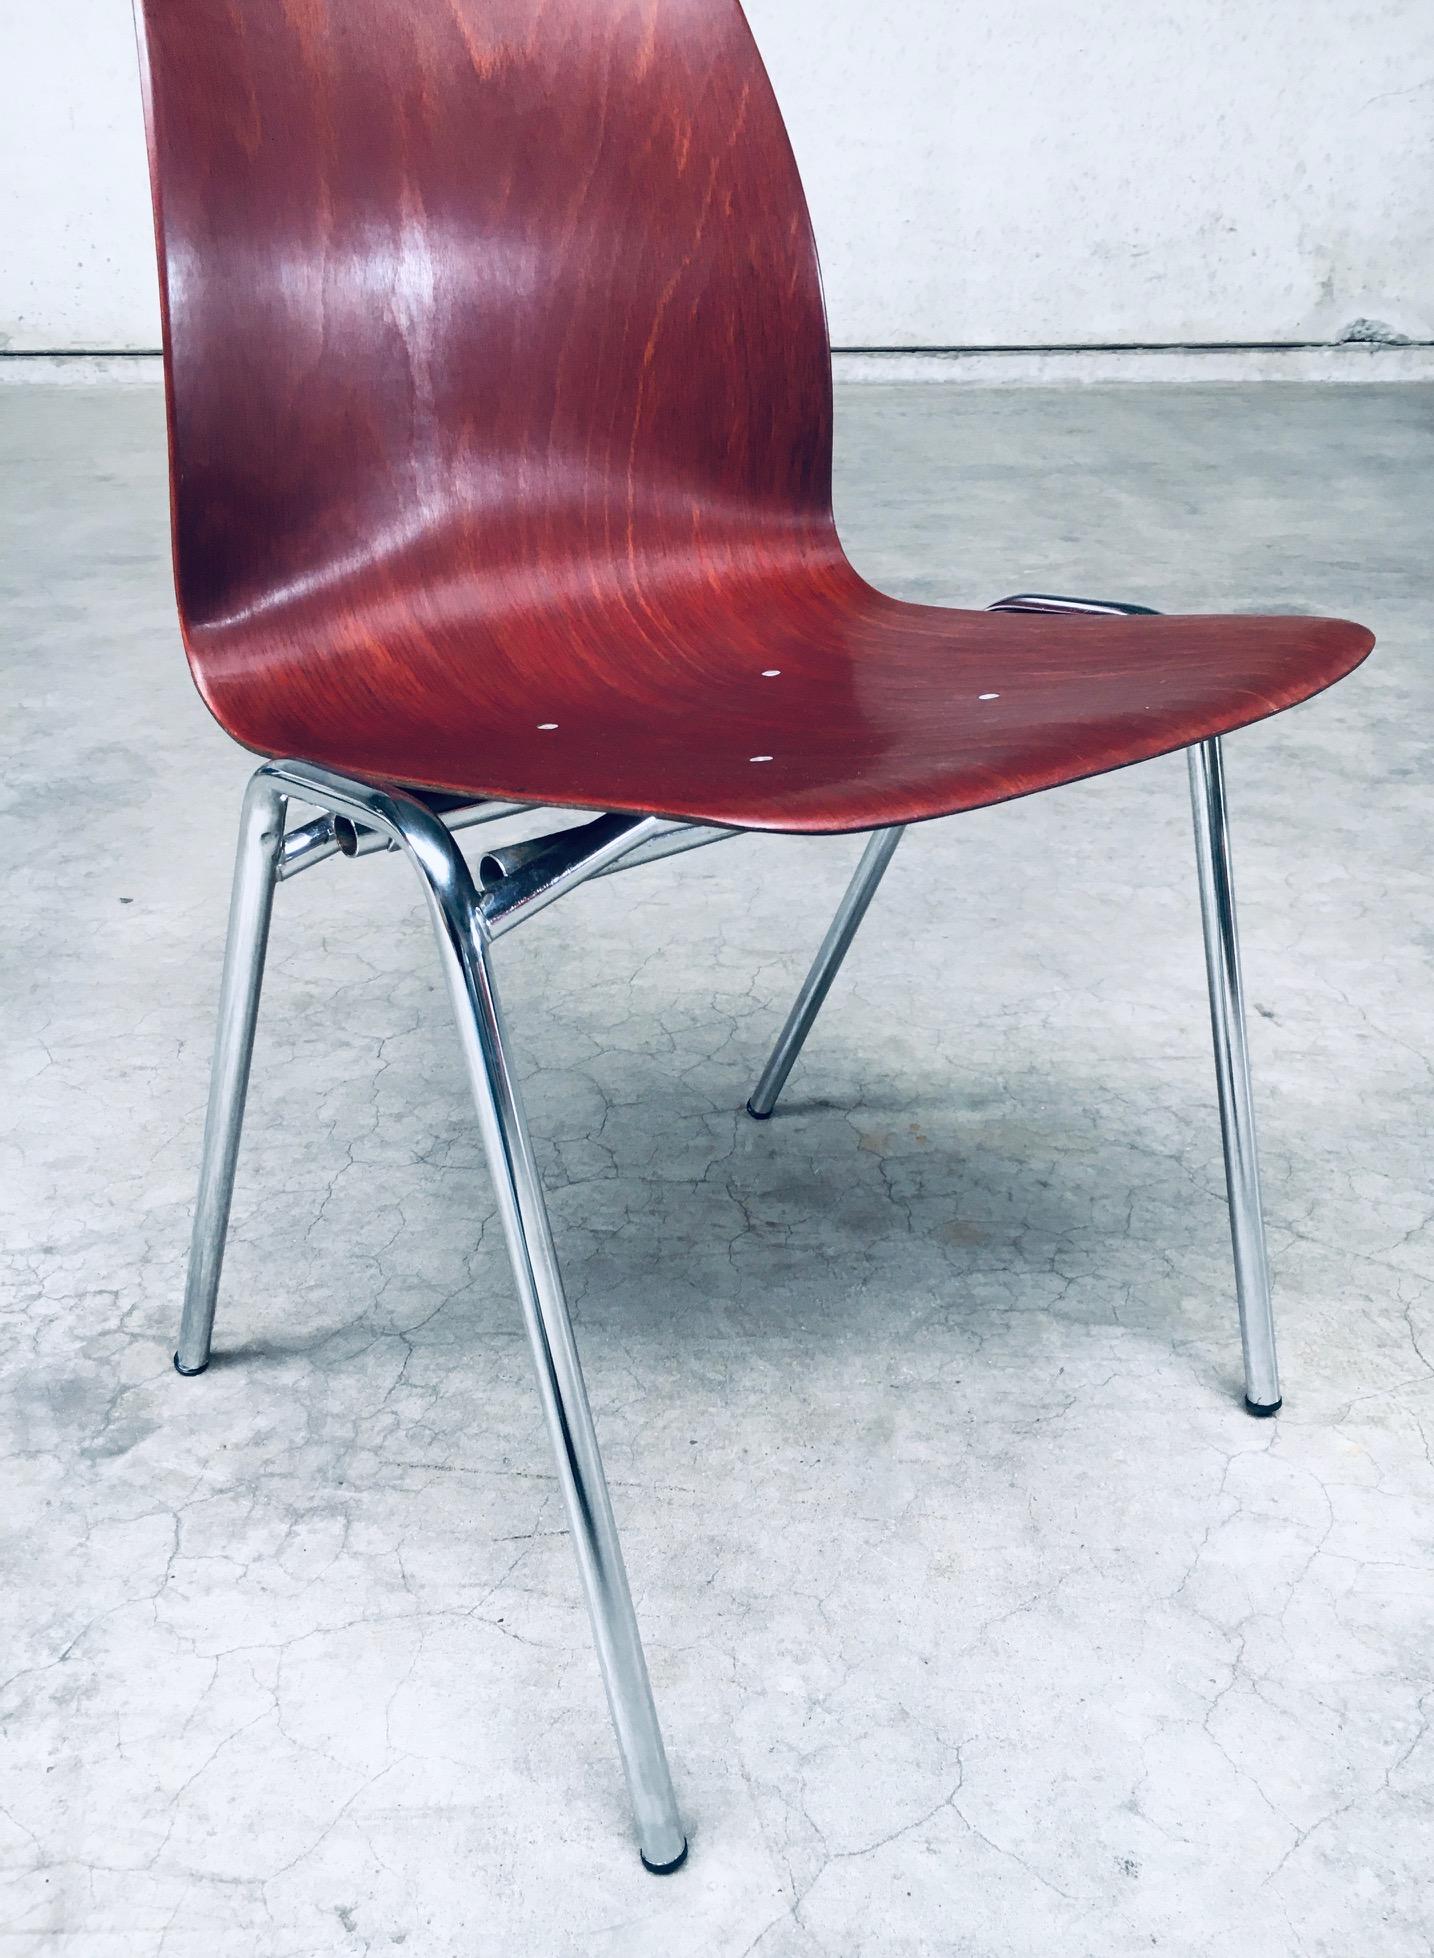 Midcentury Design Stacking Chairs by Elmar Flötotto for Pagholz, 1960's Germany For Sale 8